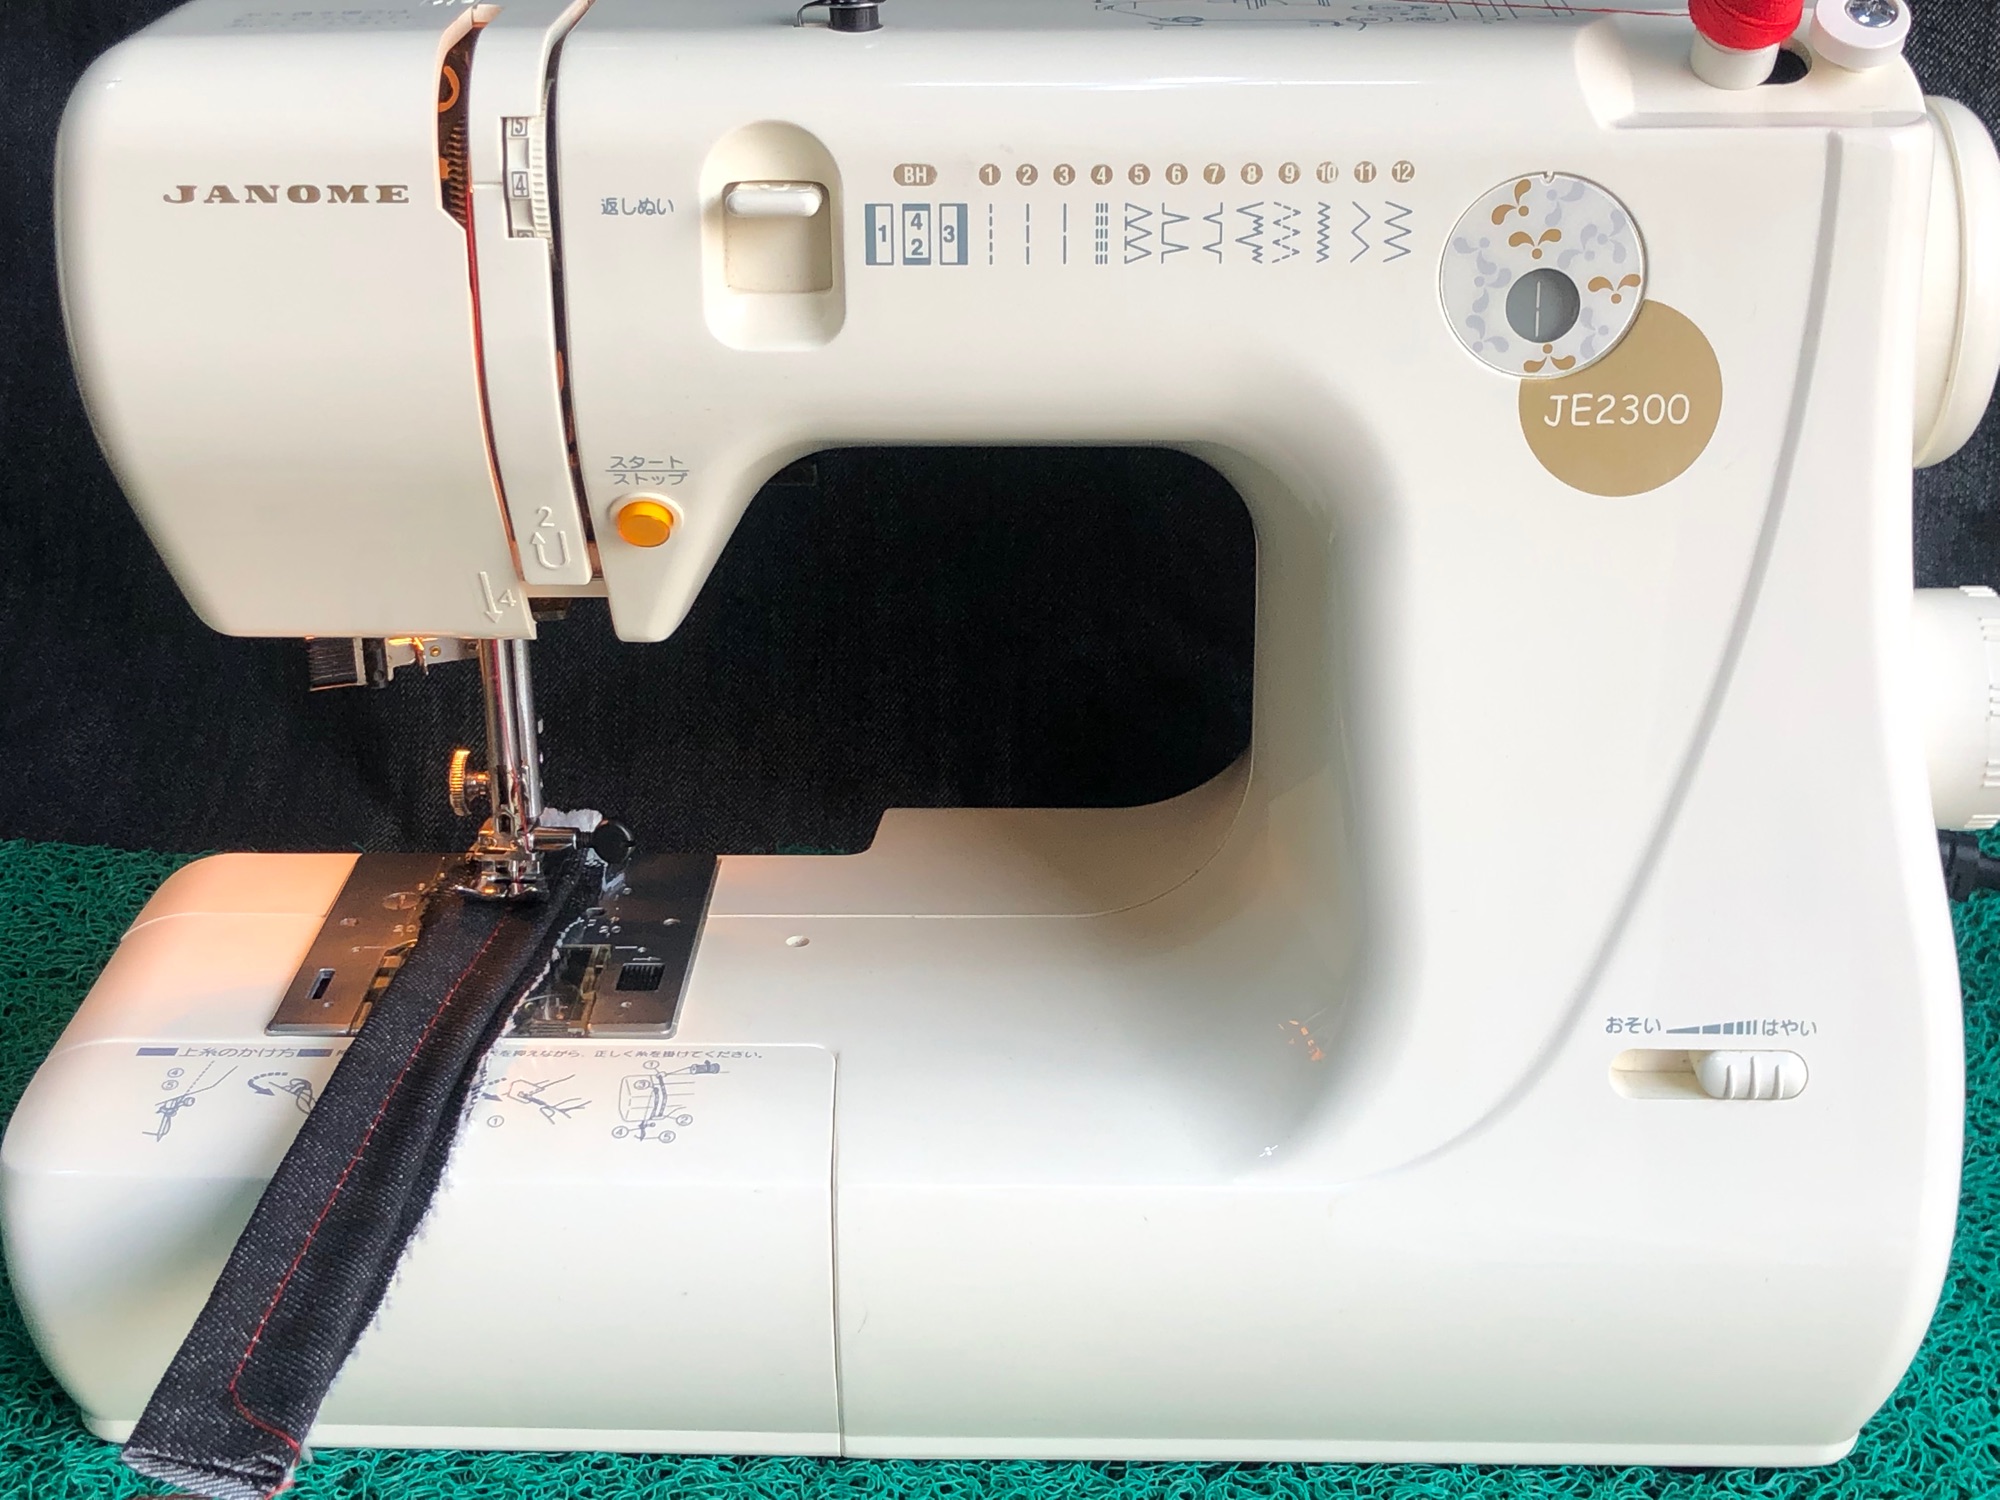 Janome Heavy Duty Sewing Machine: Easy, Versatile, Push Button Operated